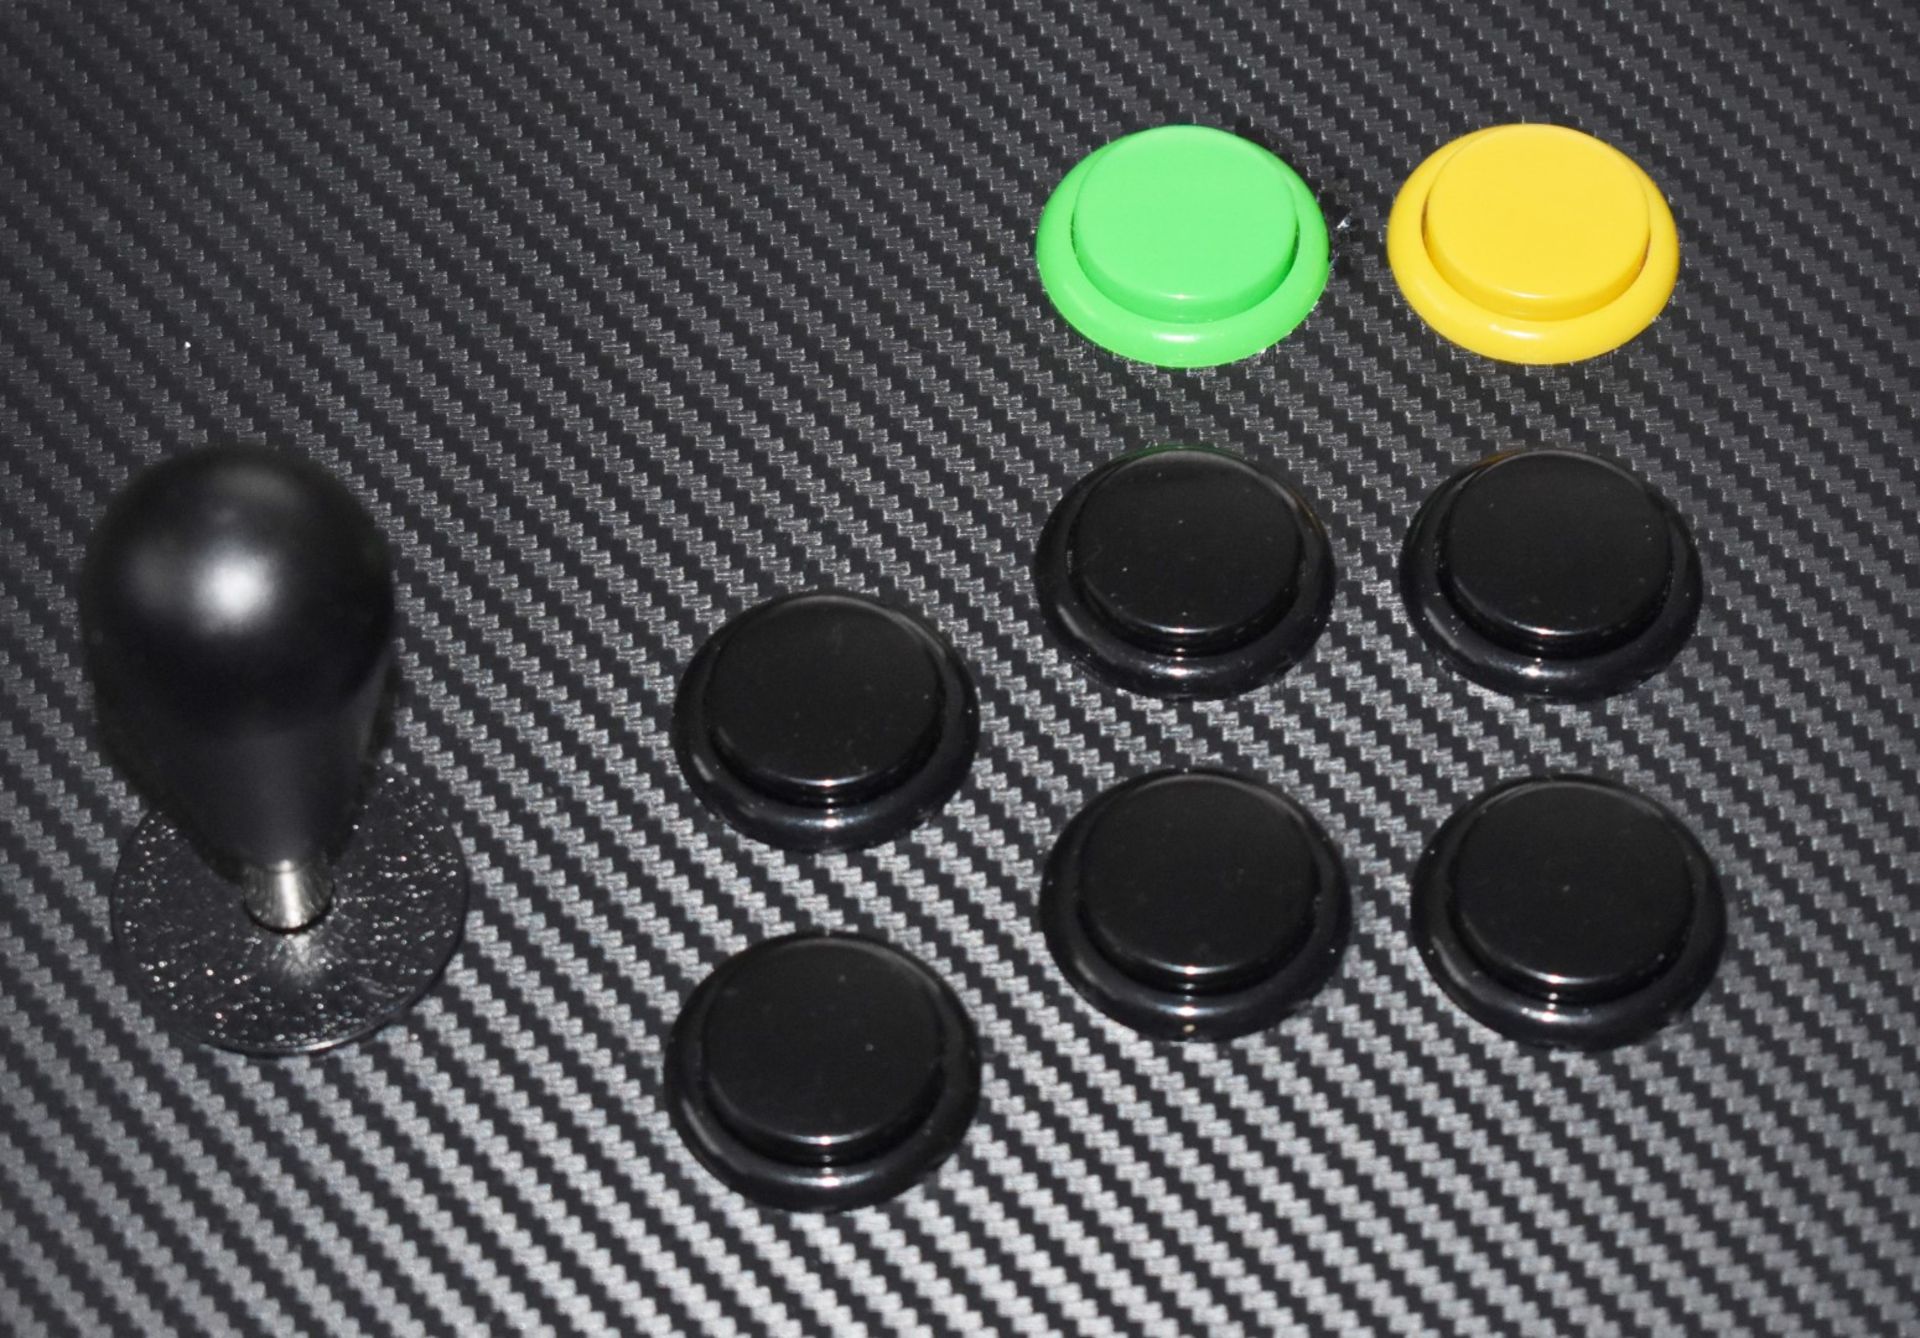 1 x Custom Two Player Arcade Control Stick - Pandoras Box With Games - NO VAT ON THE HAMMER! - Image 6 of 7